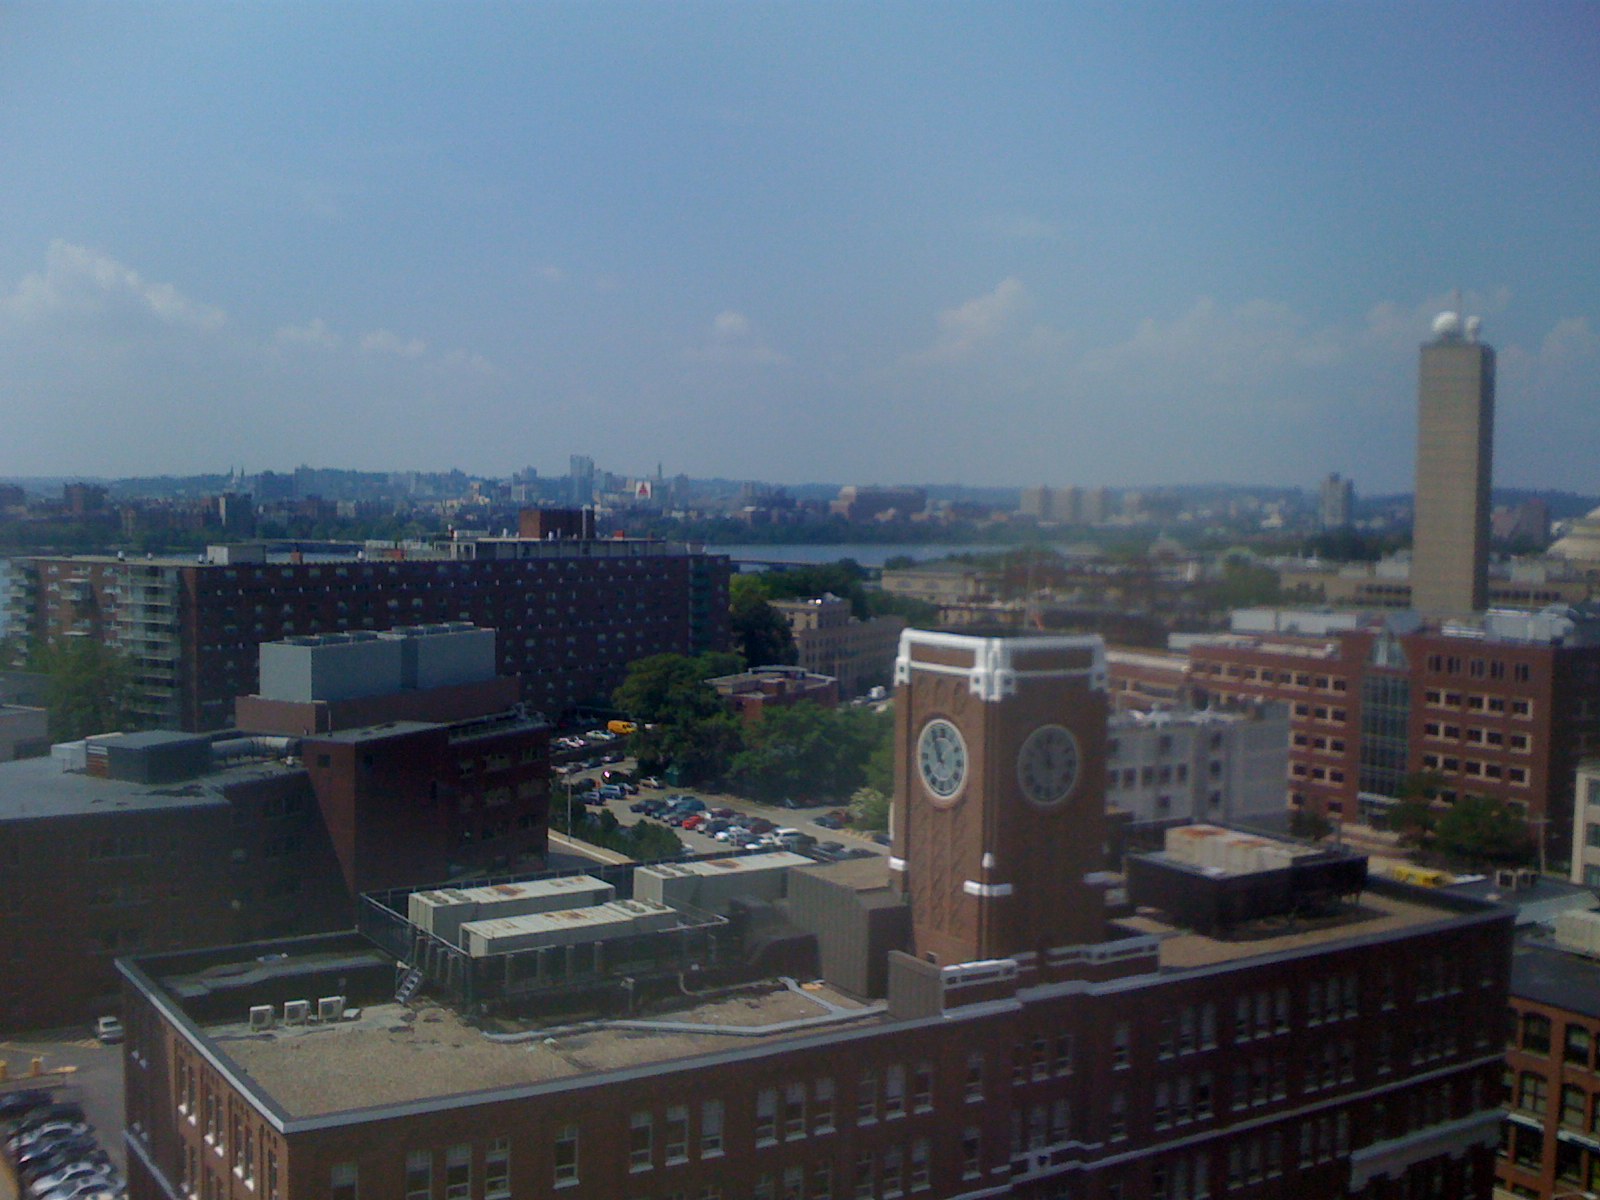 the Charles, MIT, etc. from my office window